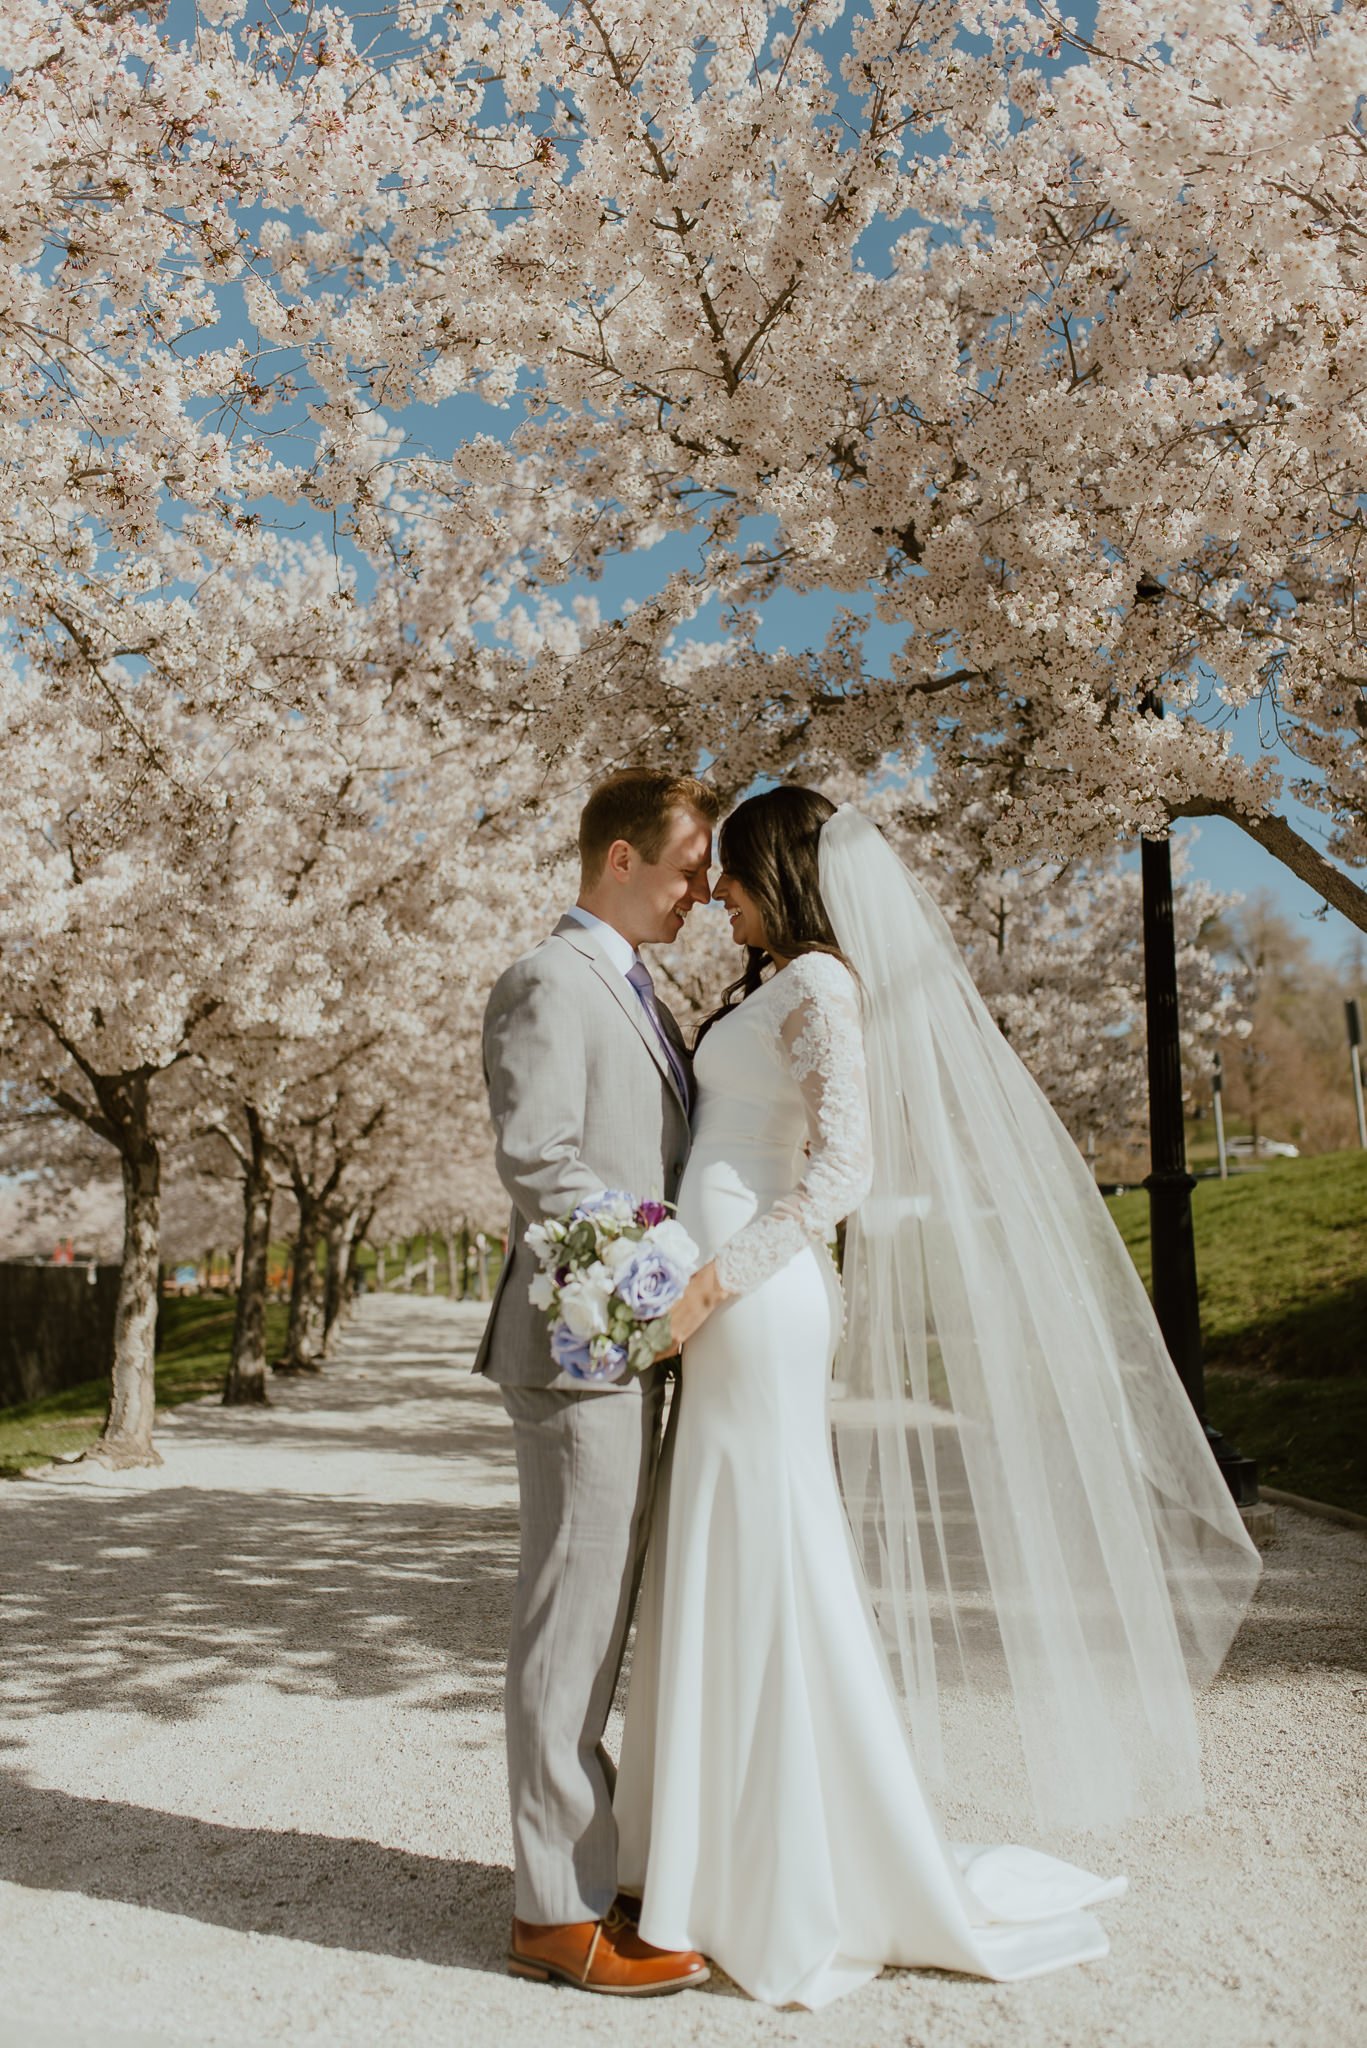 Utah-State-Capitol-Spring-Blossons-Bountiful-LDS-Wedding-Hopesandcheers-photo-24